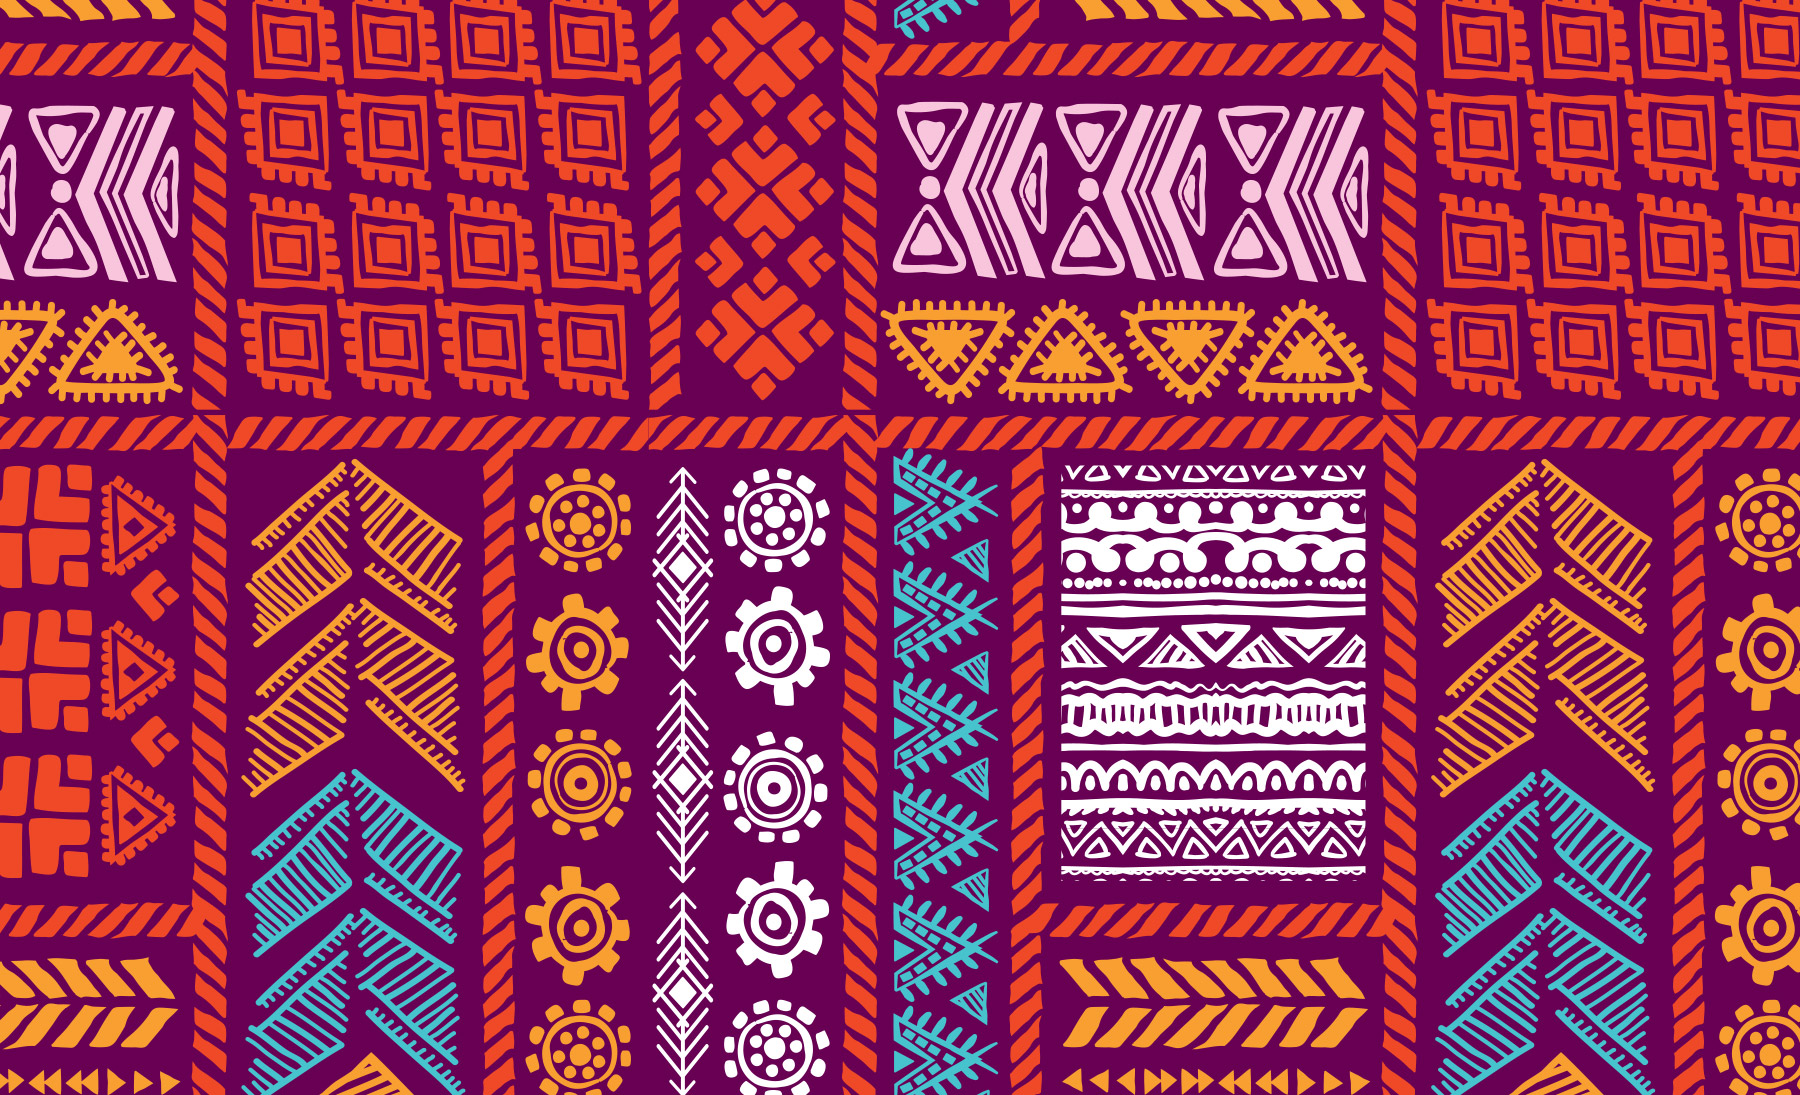 Festive brightly colored pattern